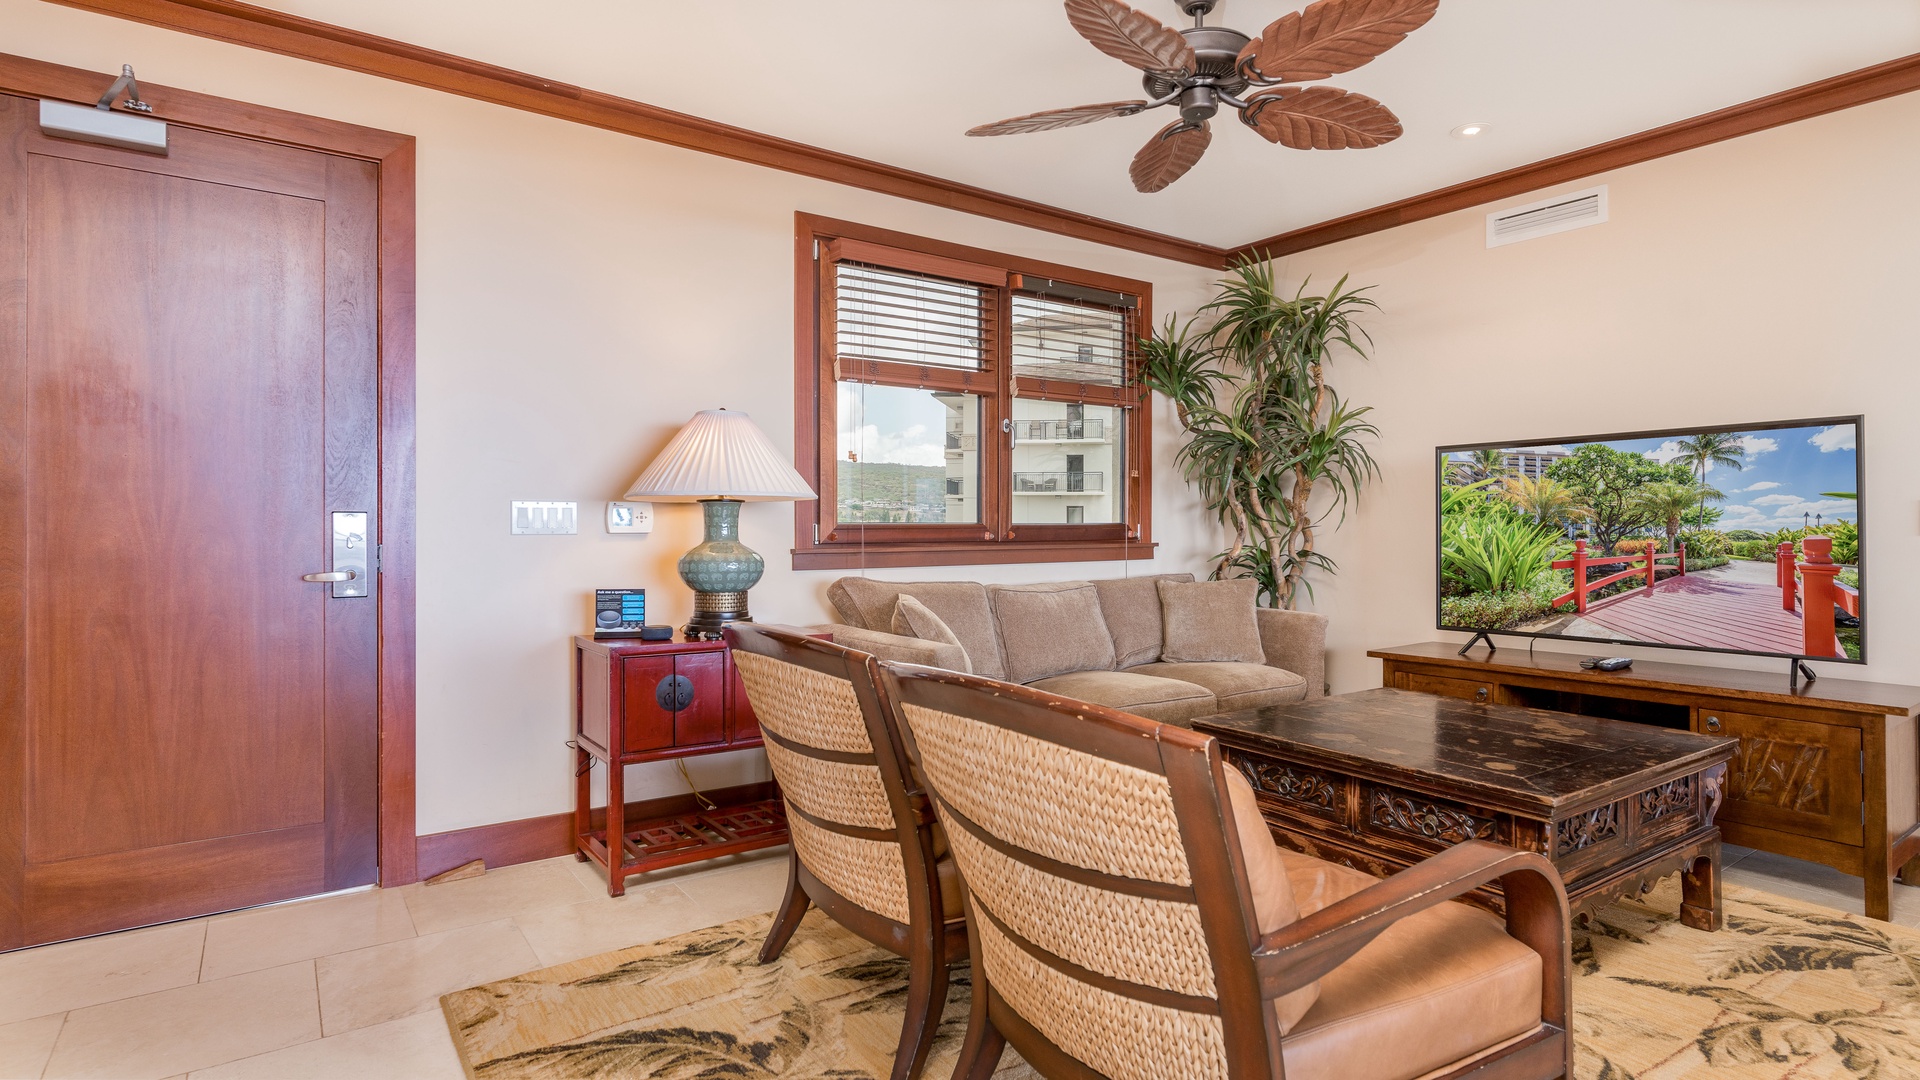 Kapolei Vacation Rentals, Ko Olina Beach Villas B701 - Enjoy movie night in the living area with the TV and tastefully appointed decor.